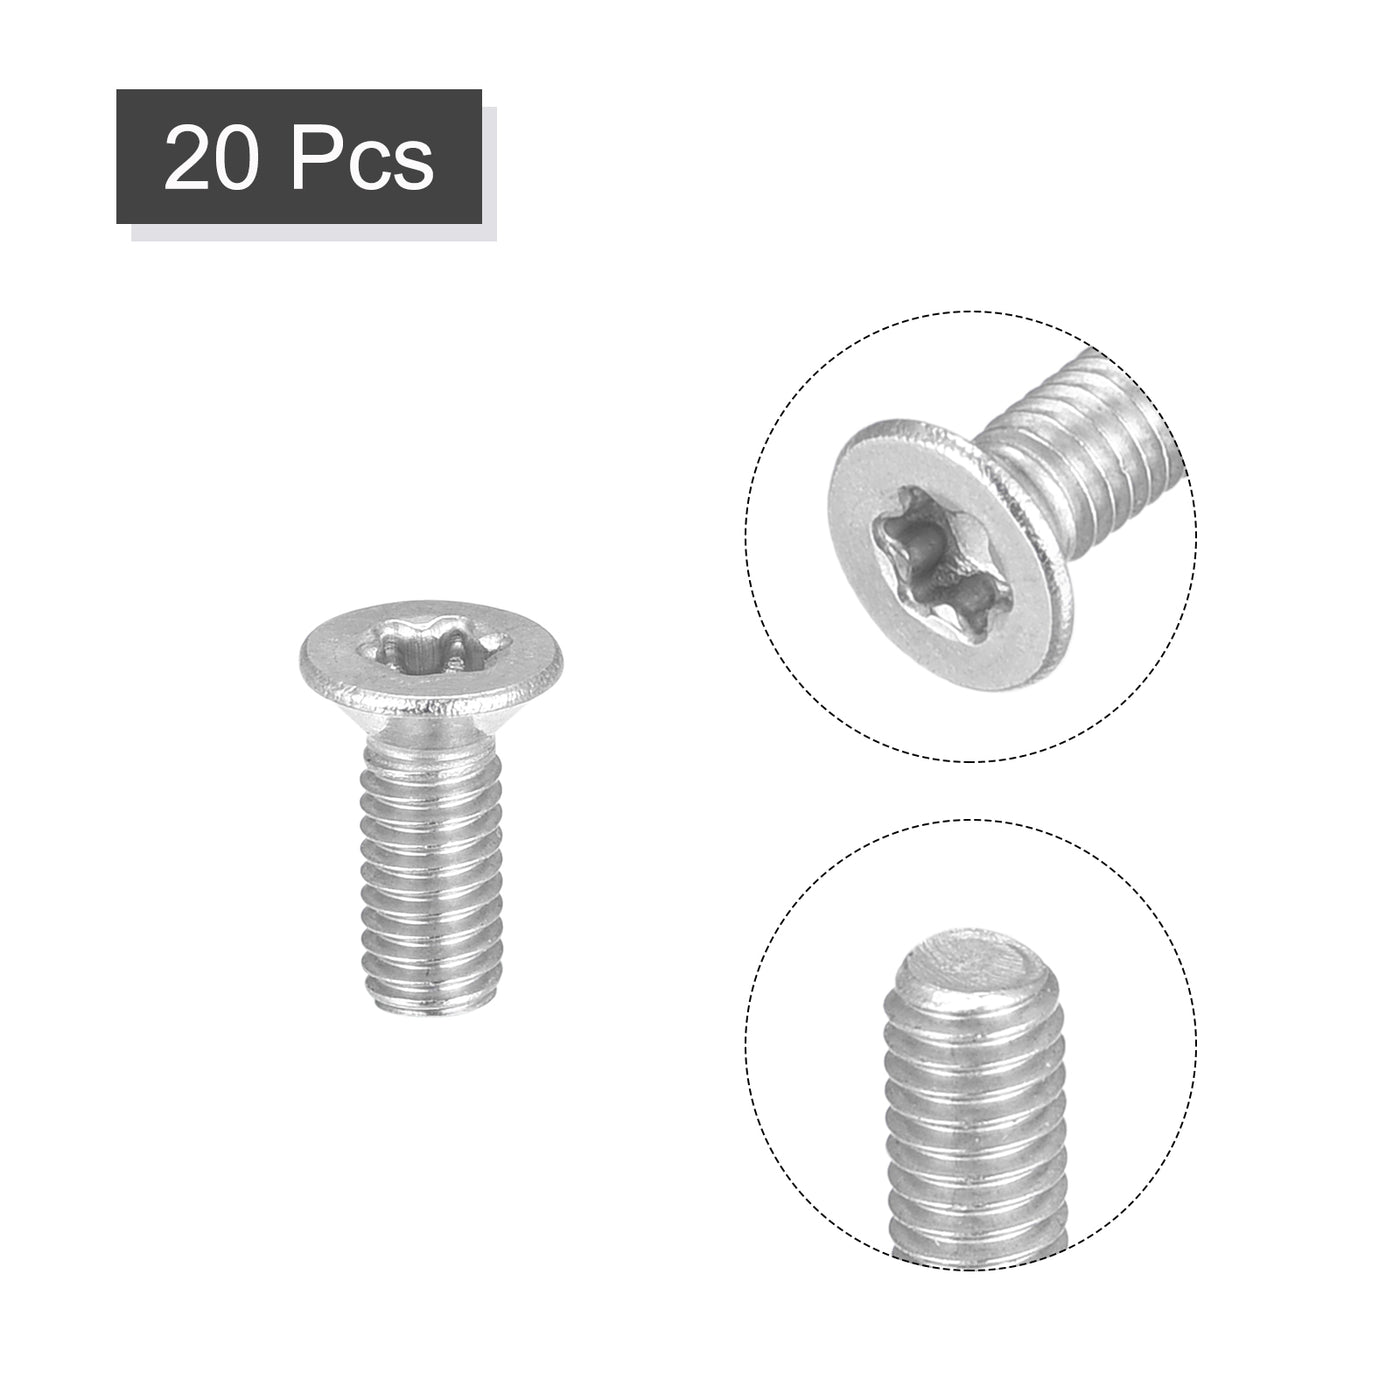 uxcell Uxcell M3x8mm Torx Security Screws, 20pcs 316 Stainless Steel Countersunk Head Screw